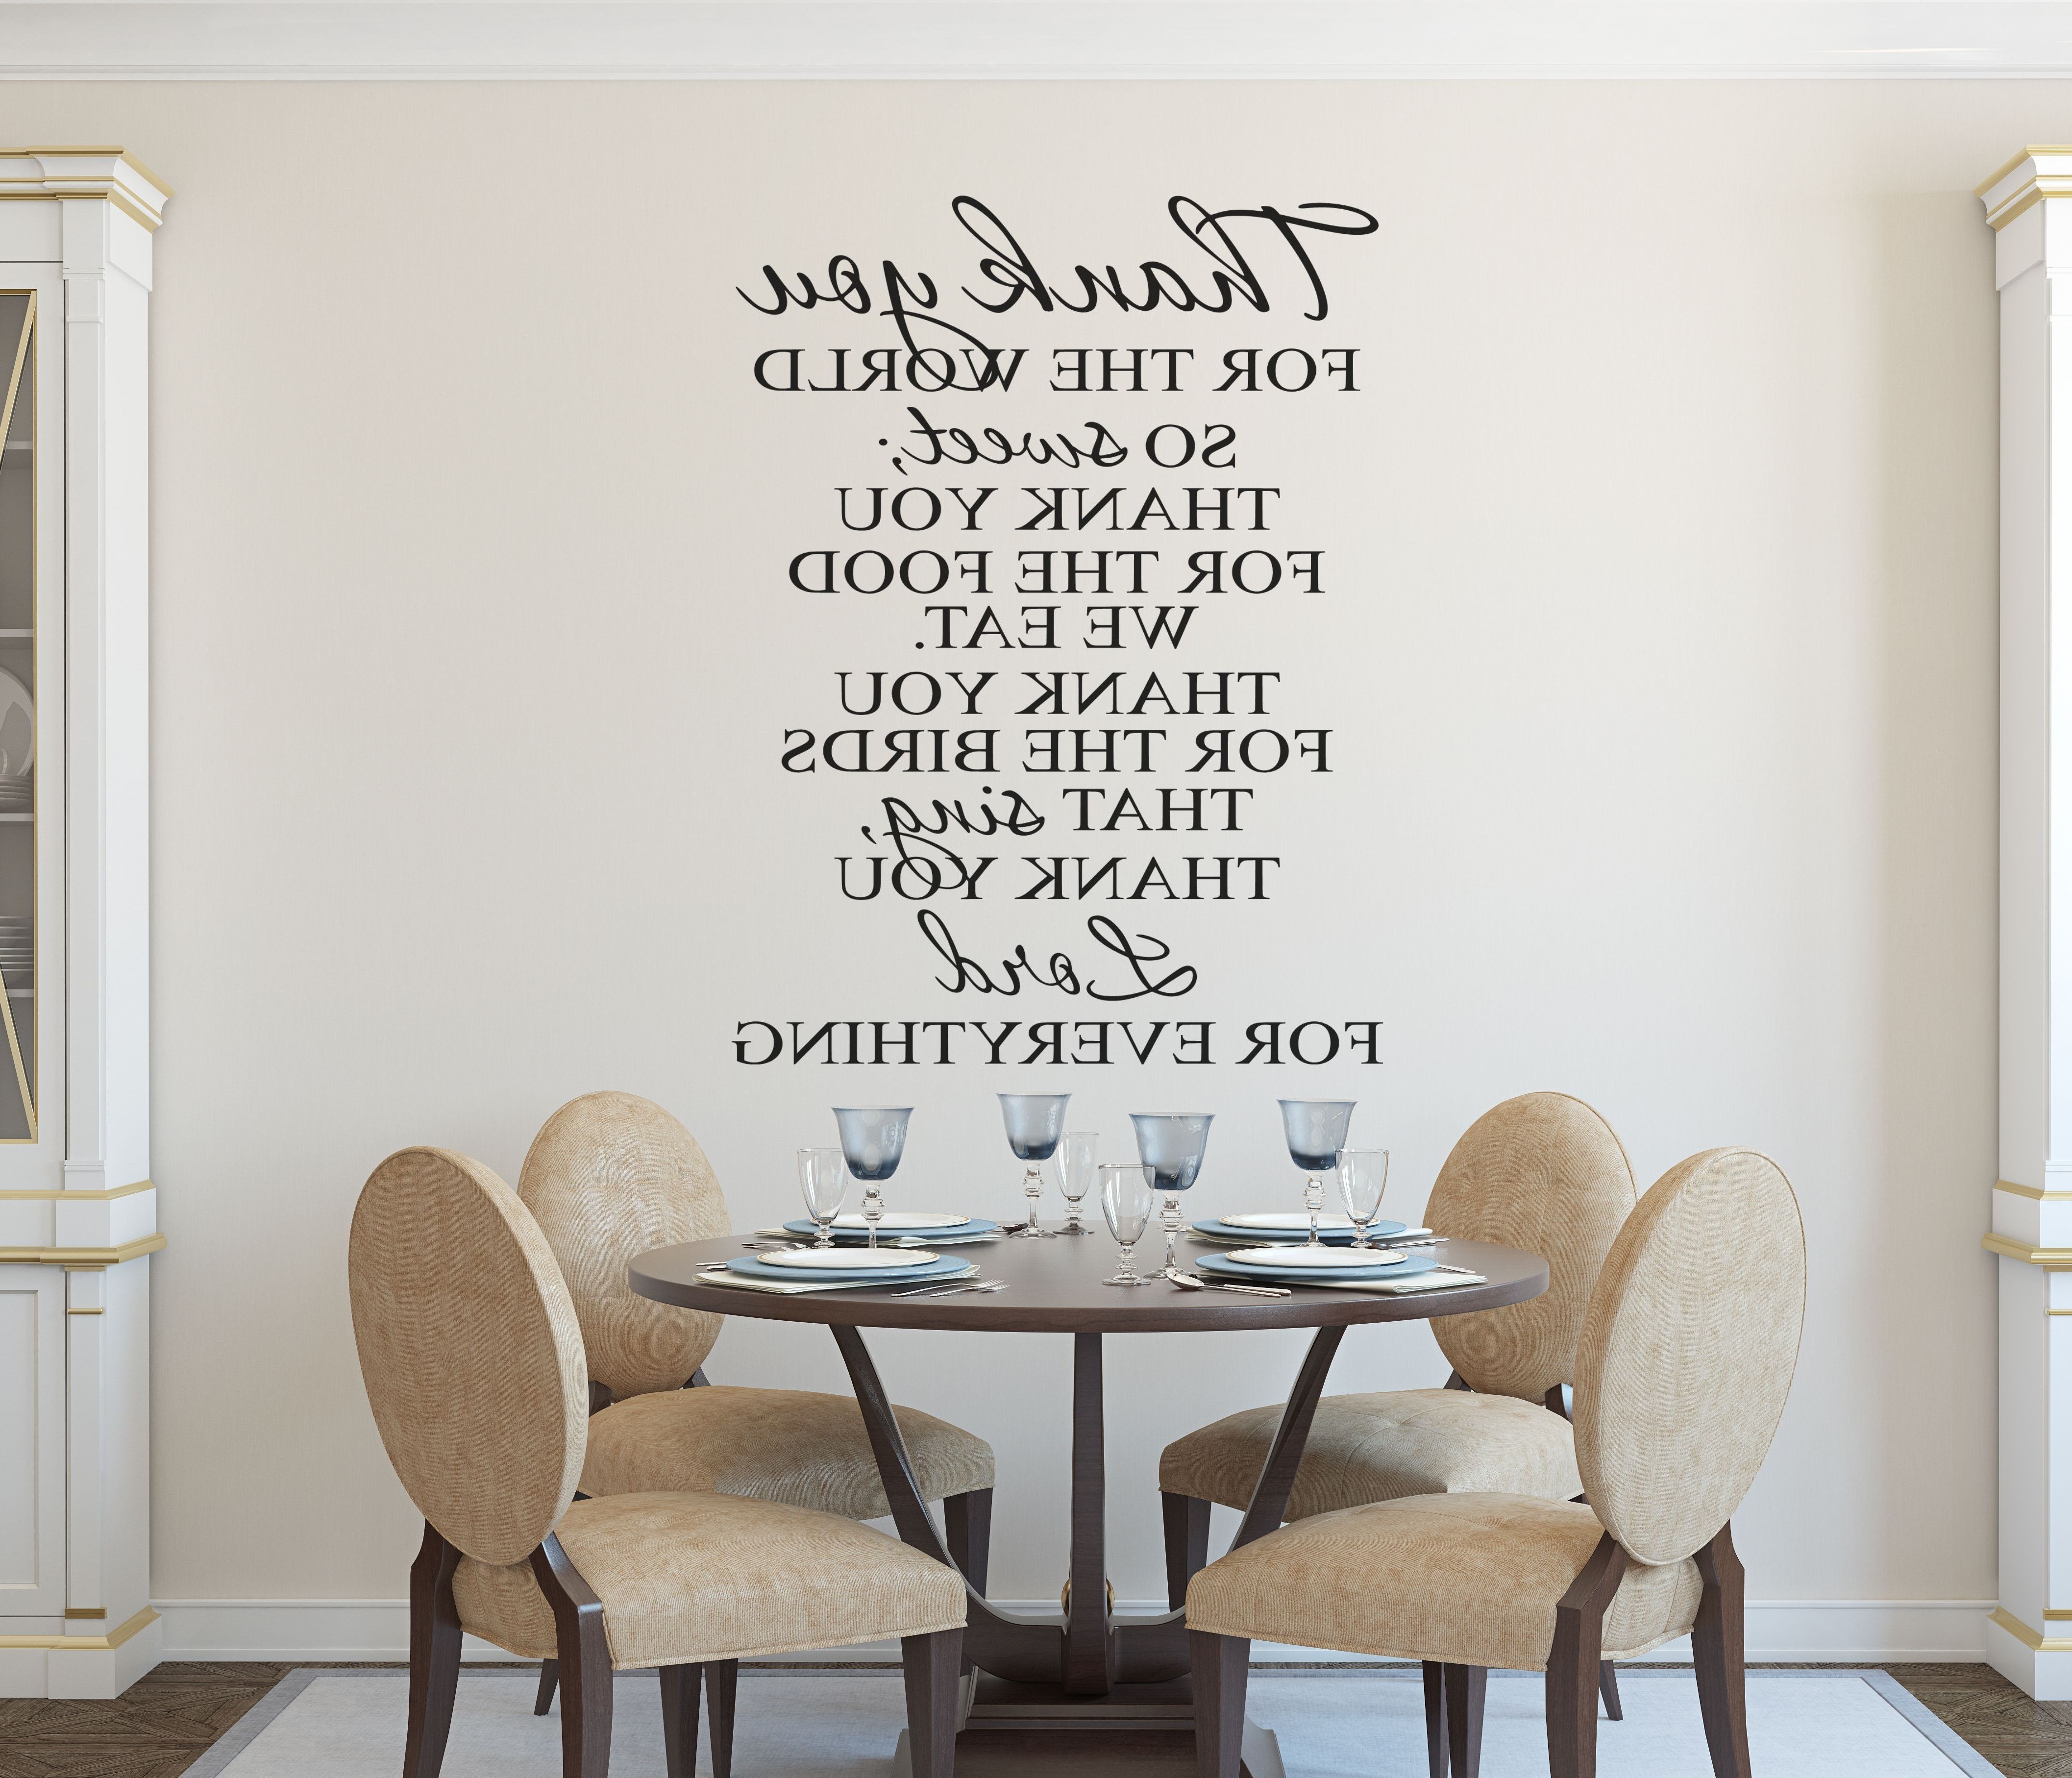 Dining Room Wall Art Awesome Bible Verse Wall Decals Bible Verses Throughout Current Biblical Wall Art (View 1 of 15)